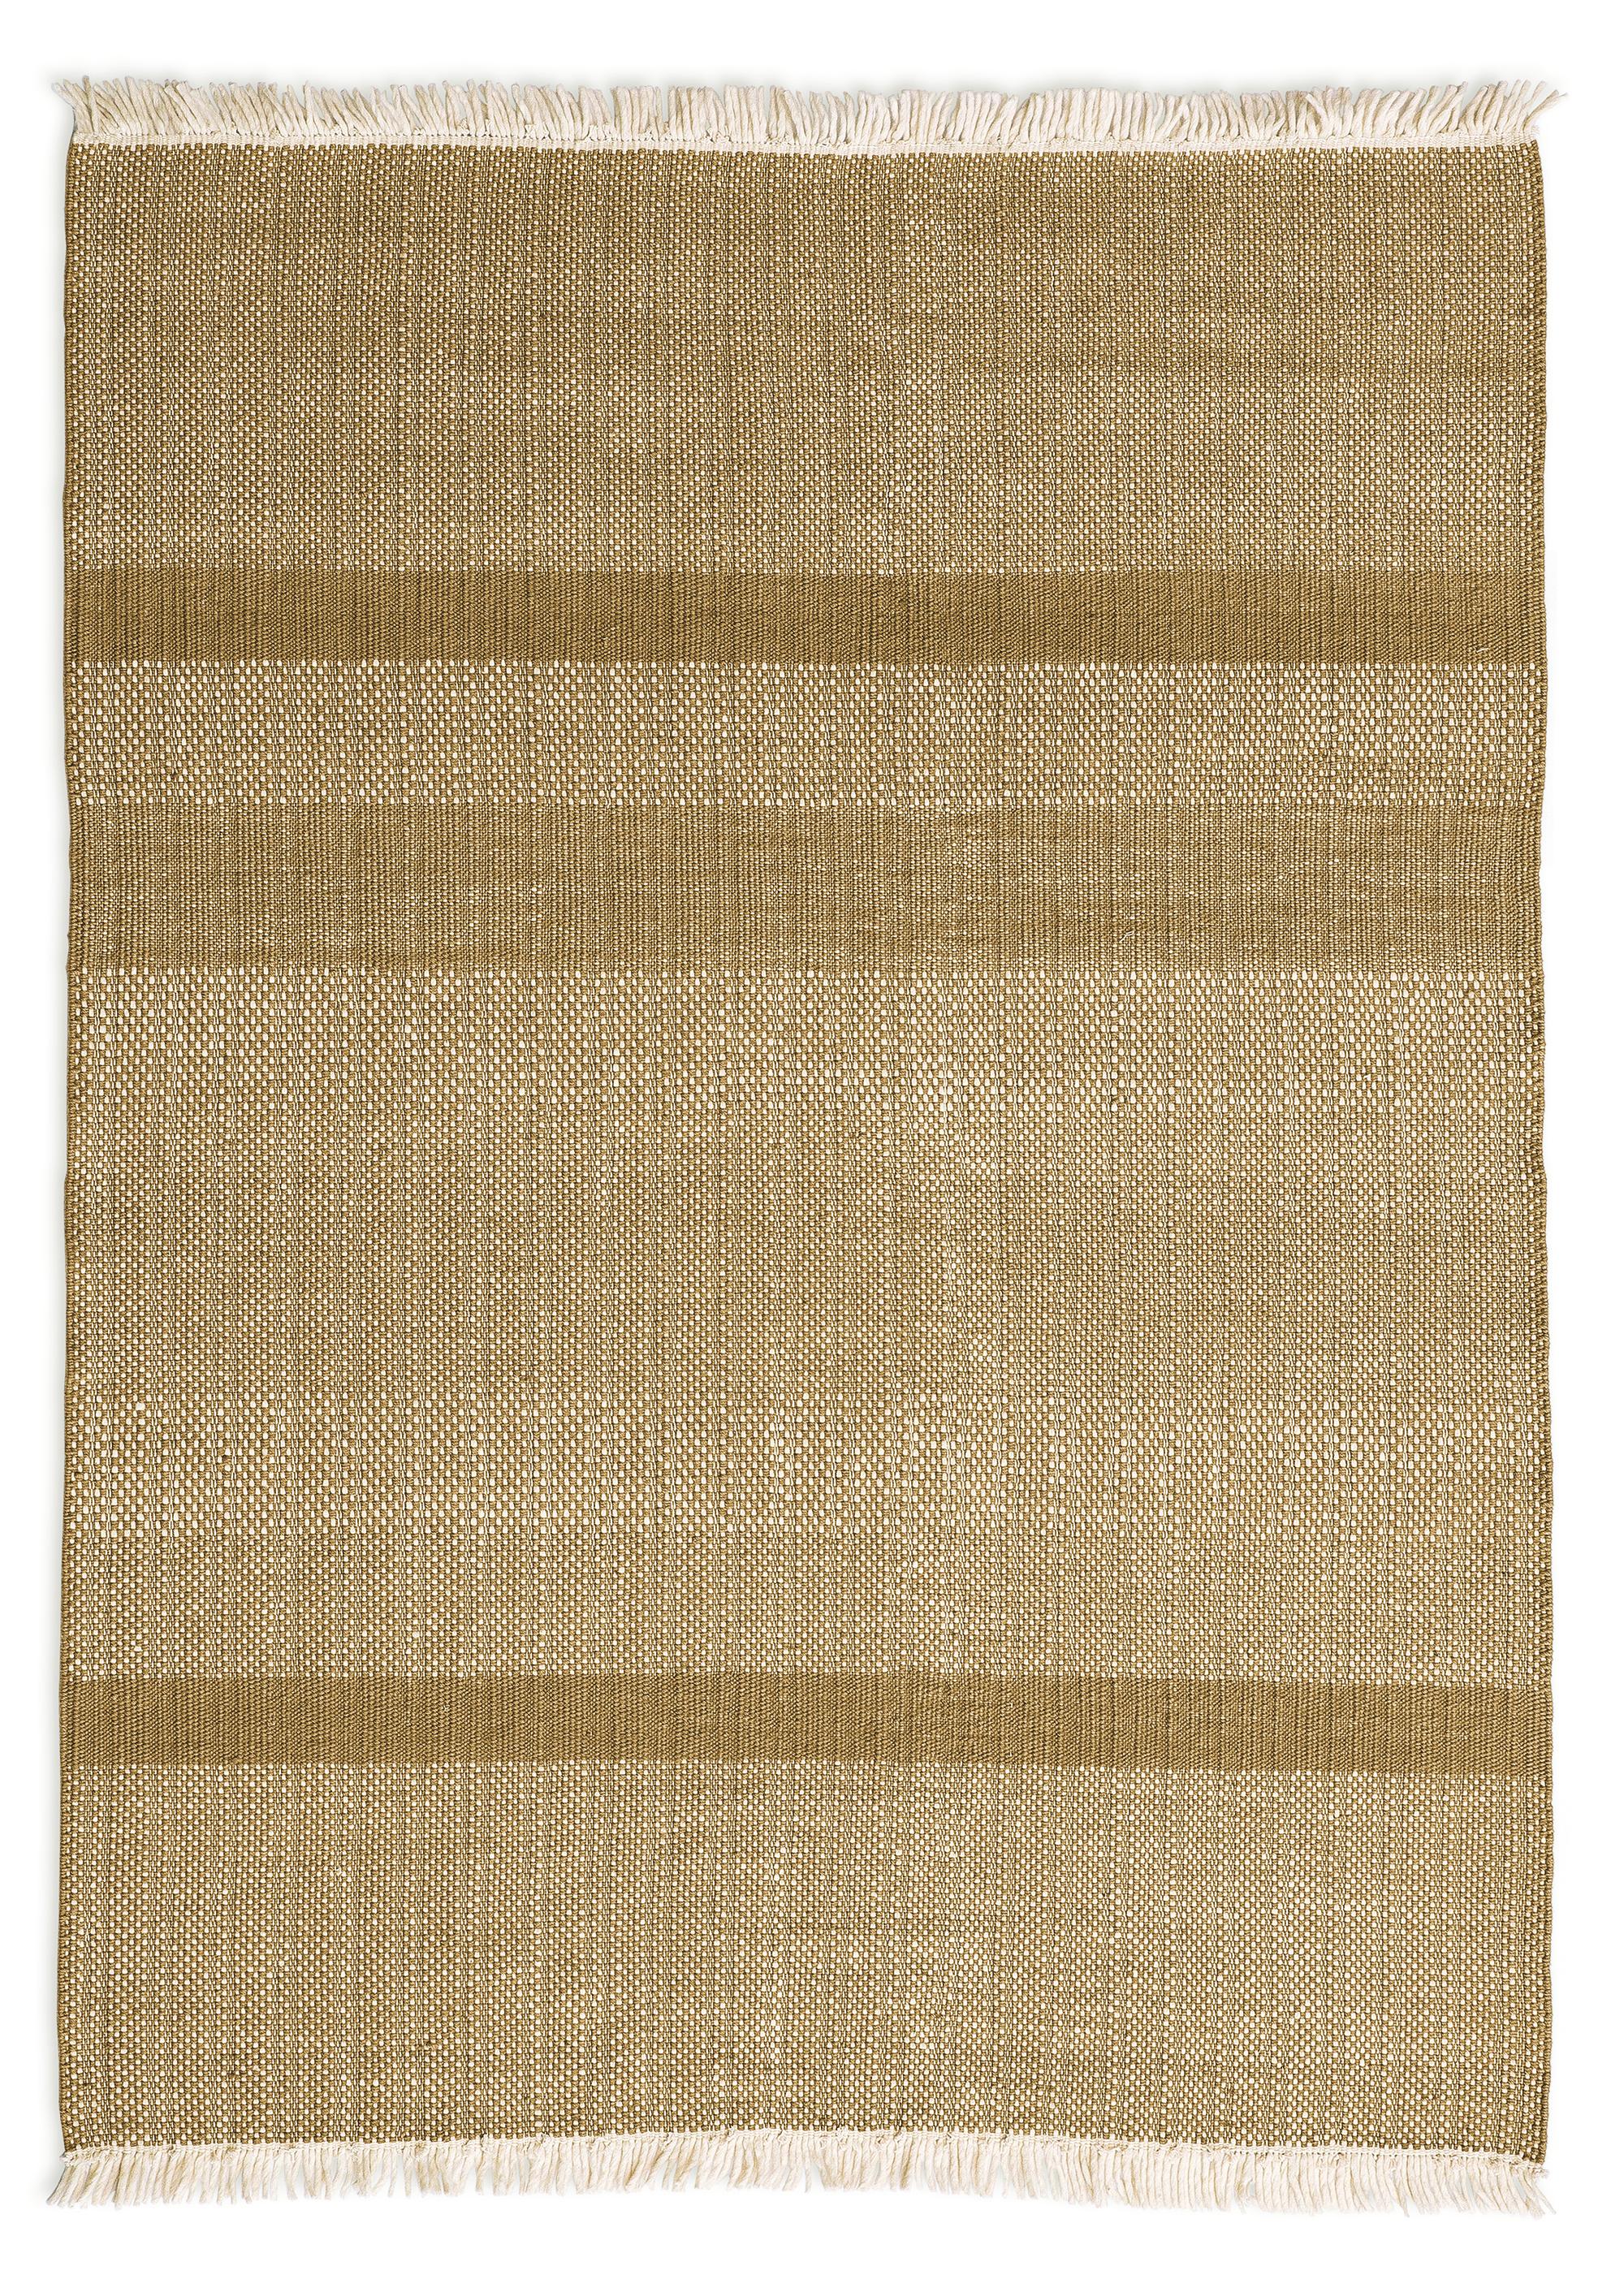 Large 'Tres Texture' Hand-Loomed Rug for Nanimarquina For Sale 2